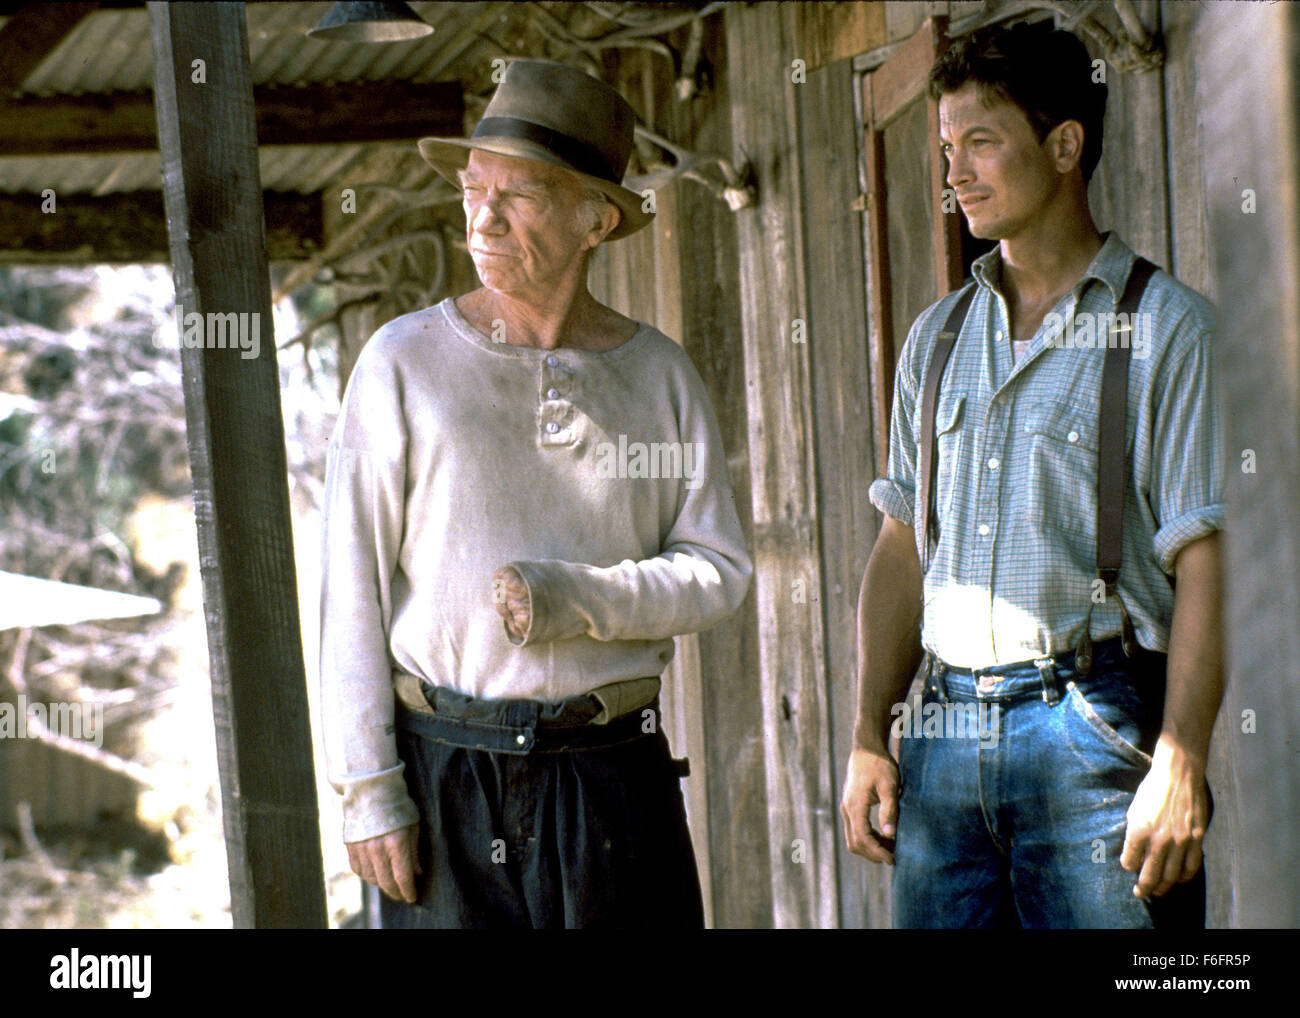 Sep 16, 1992; Los Angeles, CA, USA; RAY WALSTON (left) as Candy and GARY SINISE as George Milton in the dramatic film 'Of Mice and Men' directed by Gary Sinise. Stock Photo